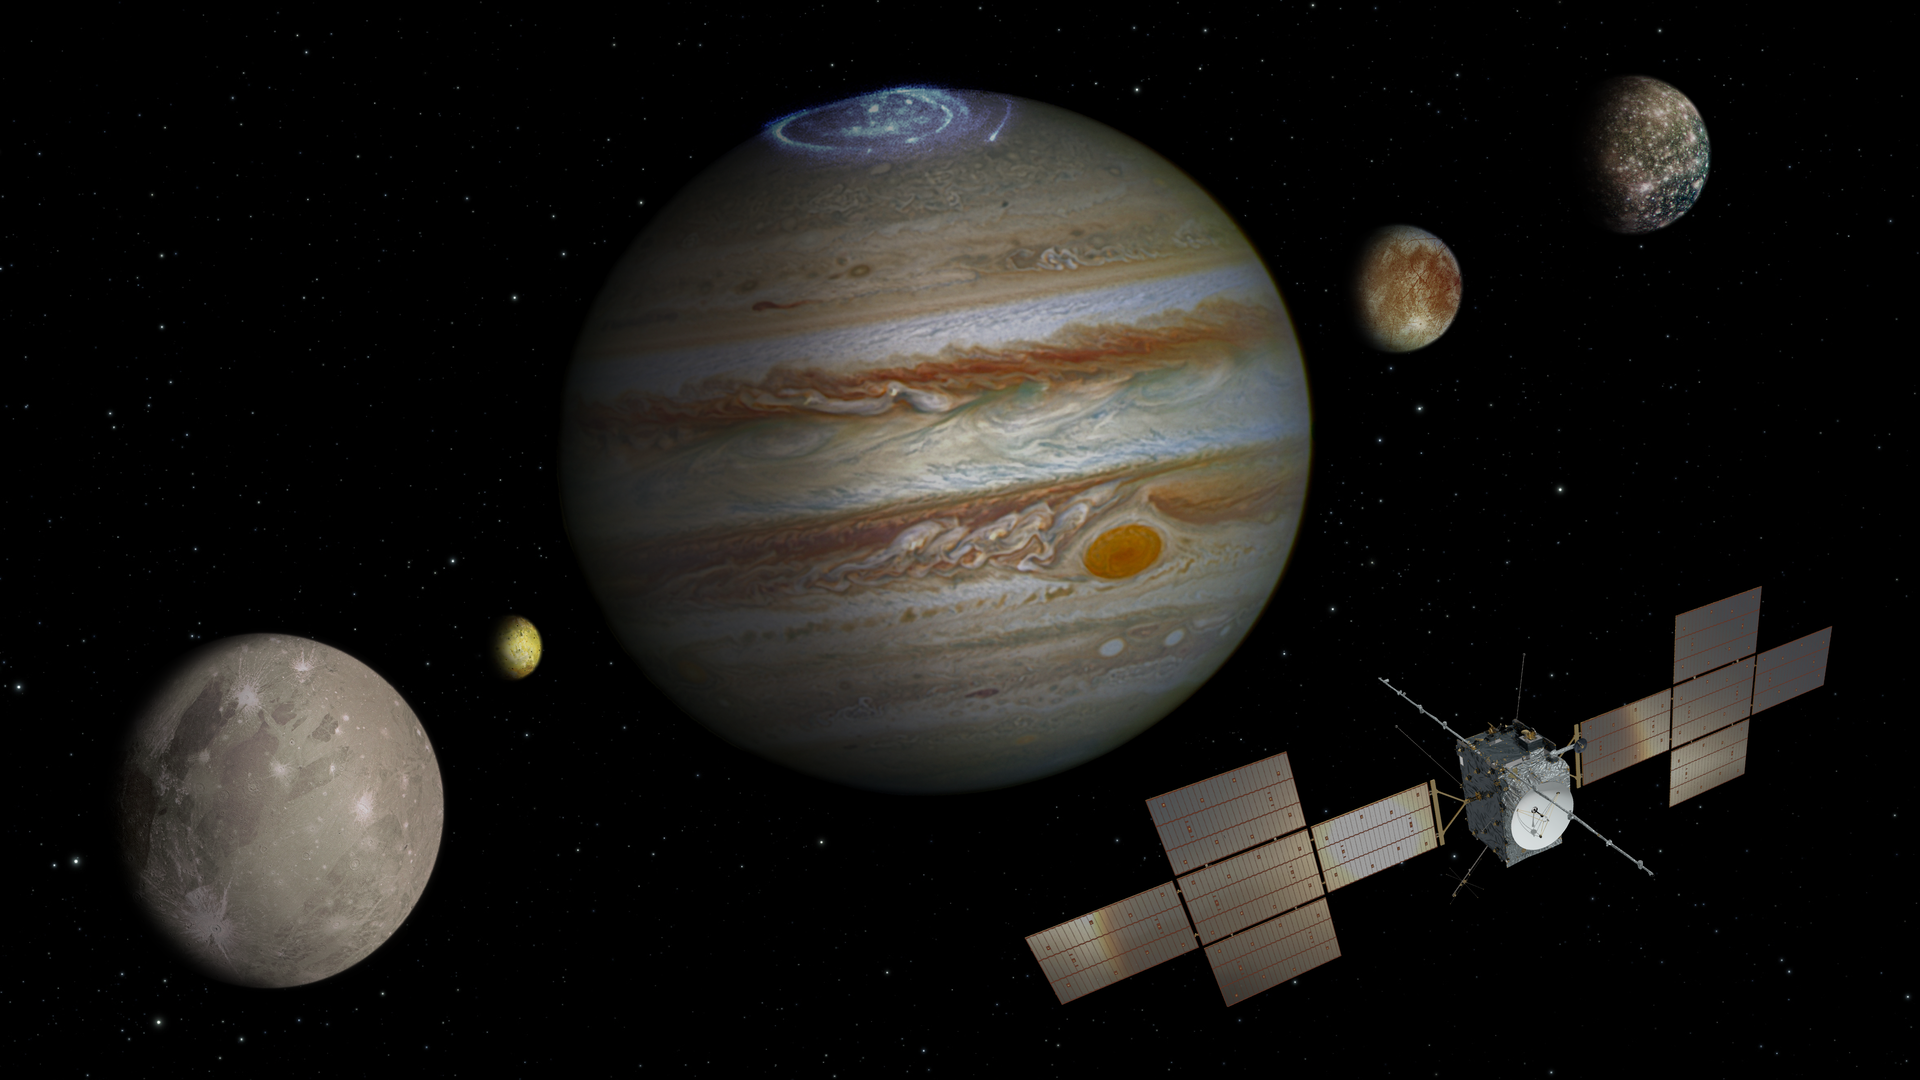 ESA launches interplanetary space station JUICE to search for life on Jupiter's satellites